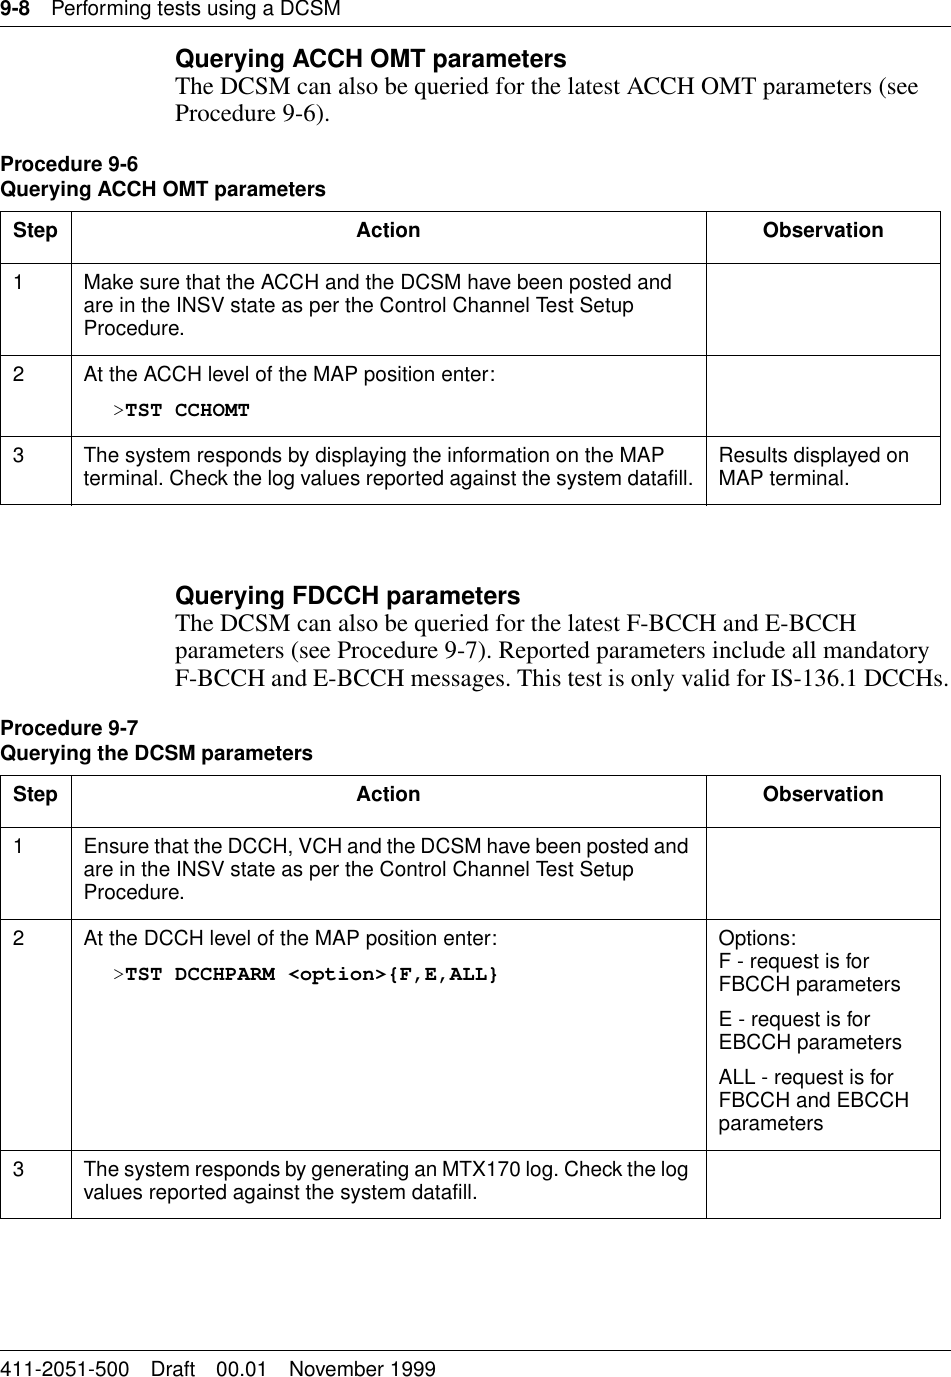 9-8 Performing tests using a DCSM411-2051-500 Draft 00.01 November 1999Querying ACCH OMT parametersThe DCSM can also be queried for the latest ACCH OMT parameters (see Procedure 9-6).Querying FDCCH parametersThe DCSM can also be queried for the latest F-BCCH and E-BCCH parameters (see Procedure 9-7). Reported parameters include all mandatory F-BCCH and E-BCCH messages. This test is only valid for IS-136.1 DCCHs.Procedure 9-6Querying ACCH OMT parametersStep Action Observation1 Make sure that the ACCH and the DCSM have been posted and are in the INSV state as per the Control Channel Test Setup Procedure.2 At the ACCH level of the MAP position enter:&gt;TST CCHOMT3 The system responds by displaying the information on the MAP terminal. Check the log values reported against the system datafill. Results displayed on MAP terminal.Procedure 9-7Querying the DCSM parametersStep Action Observation1 Ensure that the DCCH, VCH and the DCSM have been posted and are in the INSV state as per the Control Channel Test Setup Procedure.2 At the DCCH level of the MAP position enter:&gt;TST DCCHPARM &lt;option&gt;{F,E,ALL}Options:F - request is for FBCCH parametersE - request is for EBCCH parametersALL - request is for FBCCH and EBCCH parameters3 The system responds by generating an MTX170 log. Check the log values reported against the system datafill.